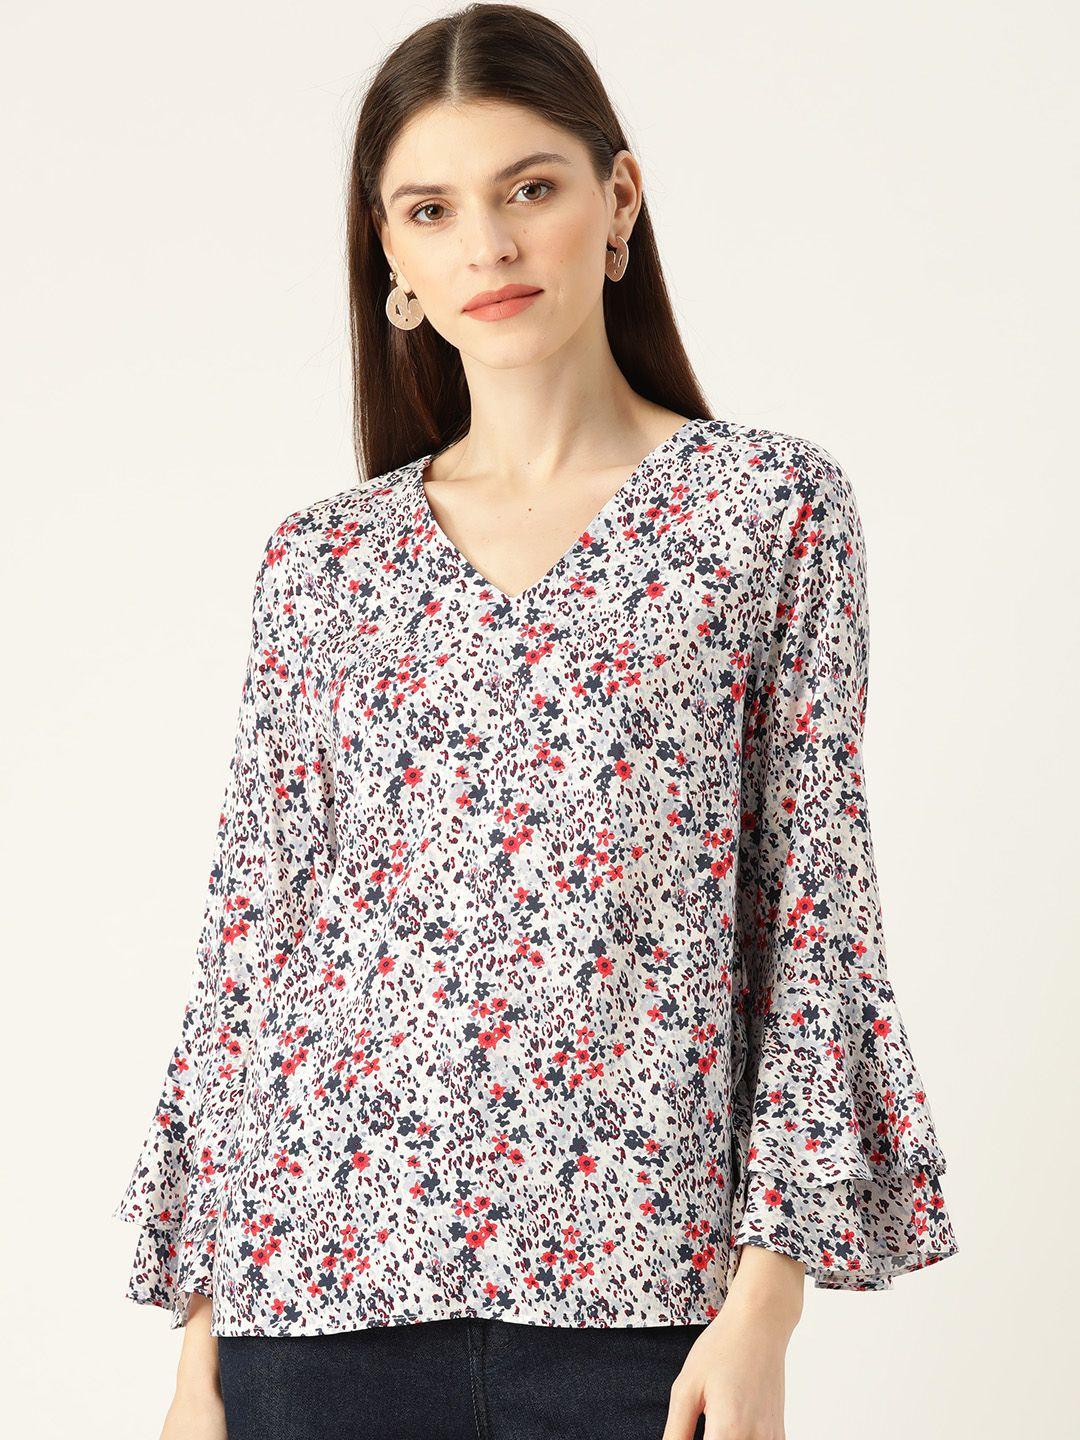 her by invictus women off-white & charcoal grey floral printed bell sleeves top